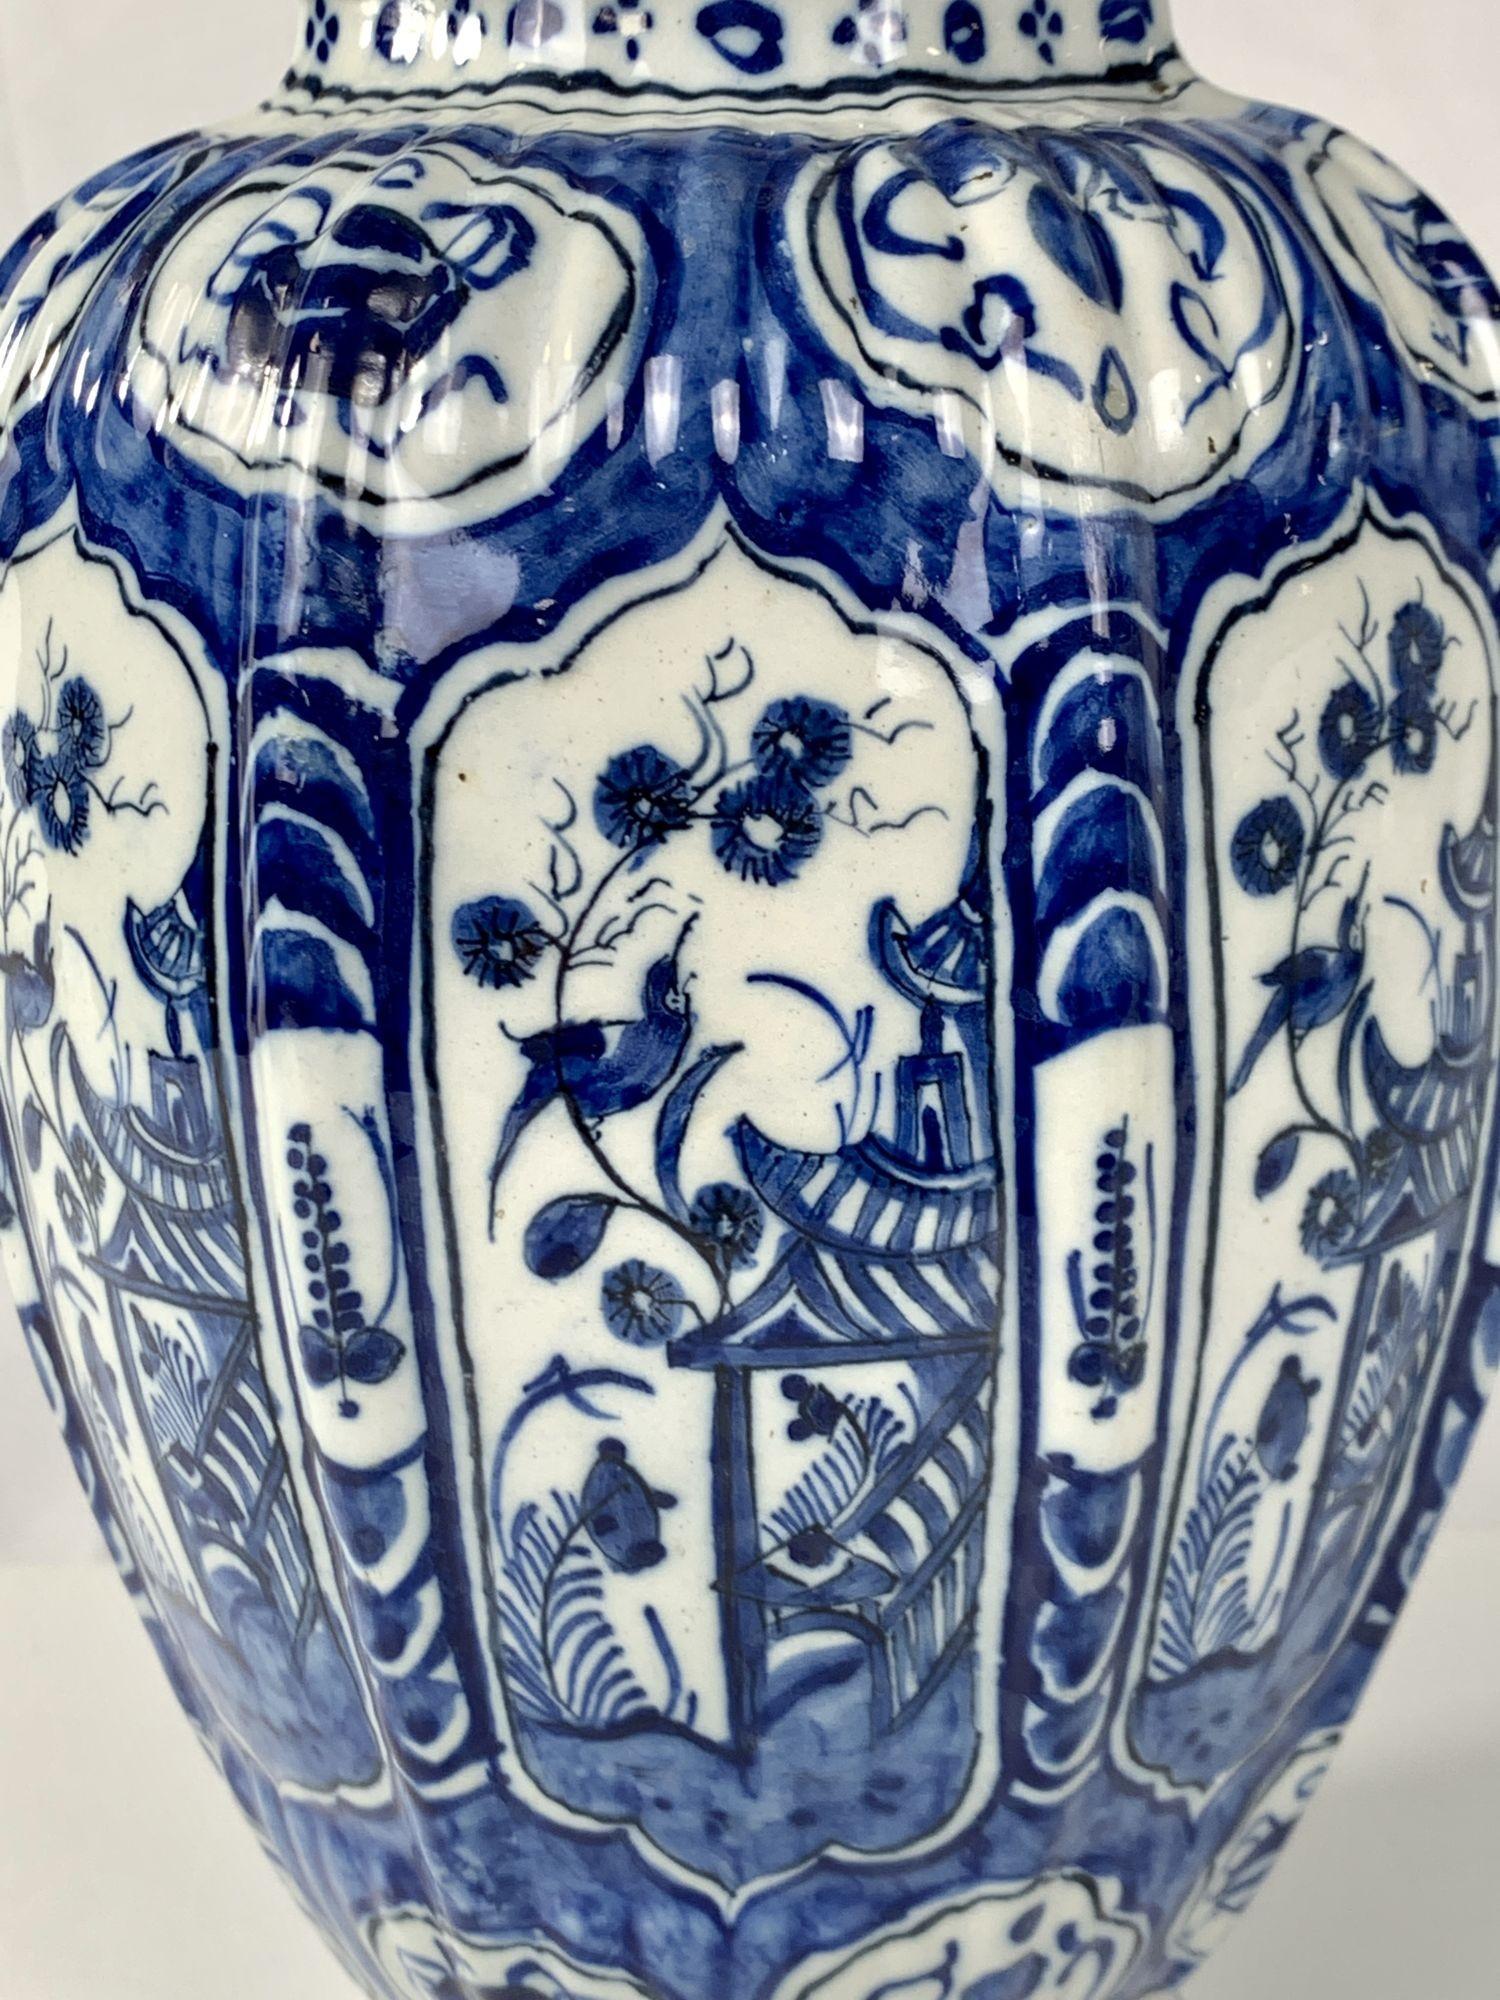 This beautiful blue and white Delft jar was made in the Netherlands circa 1800.
The jar is expertly hand-painted in deep cobalt blue with panels showing a chinoiserie scene.
We see a pagoda with a songbird in a flower-filled garden.
The shape of